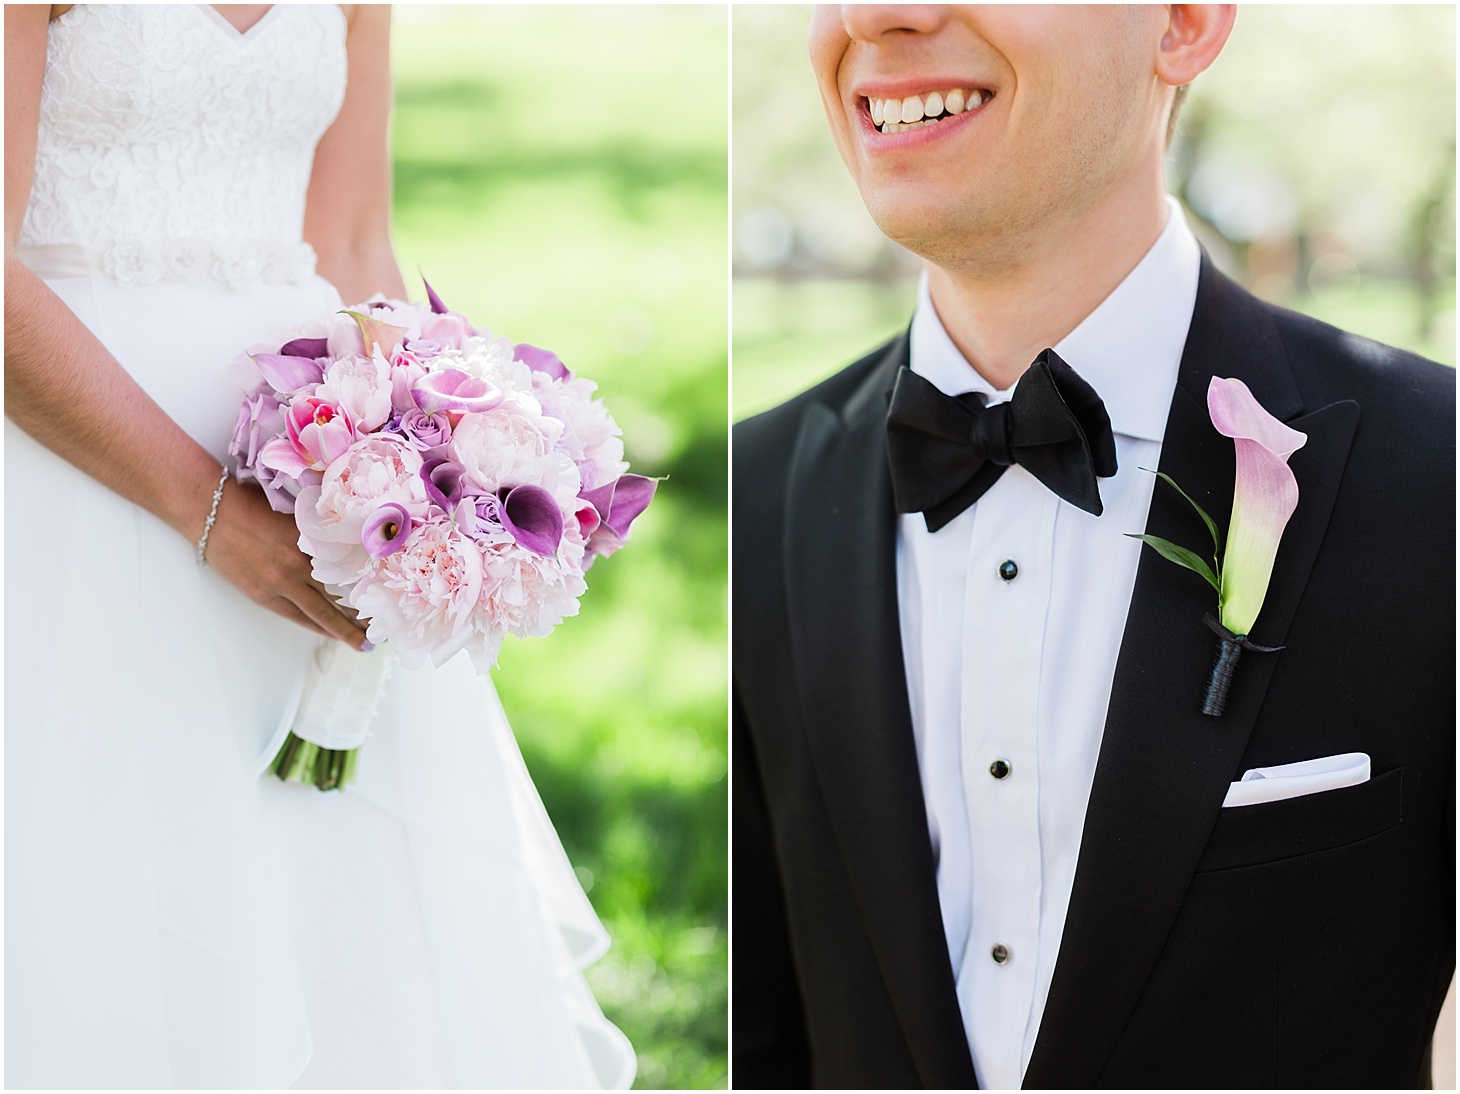 B Floral Boutonniere and Bouquet, Museum-Inspired Spring Wedding at National Museum of Women in the Arts, Sarah Bradshaw Photography, DC Wedding Photographer